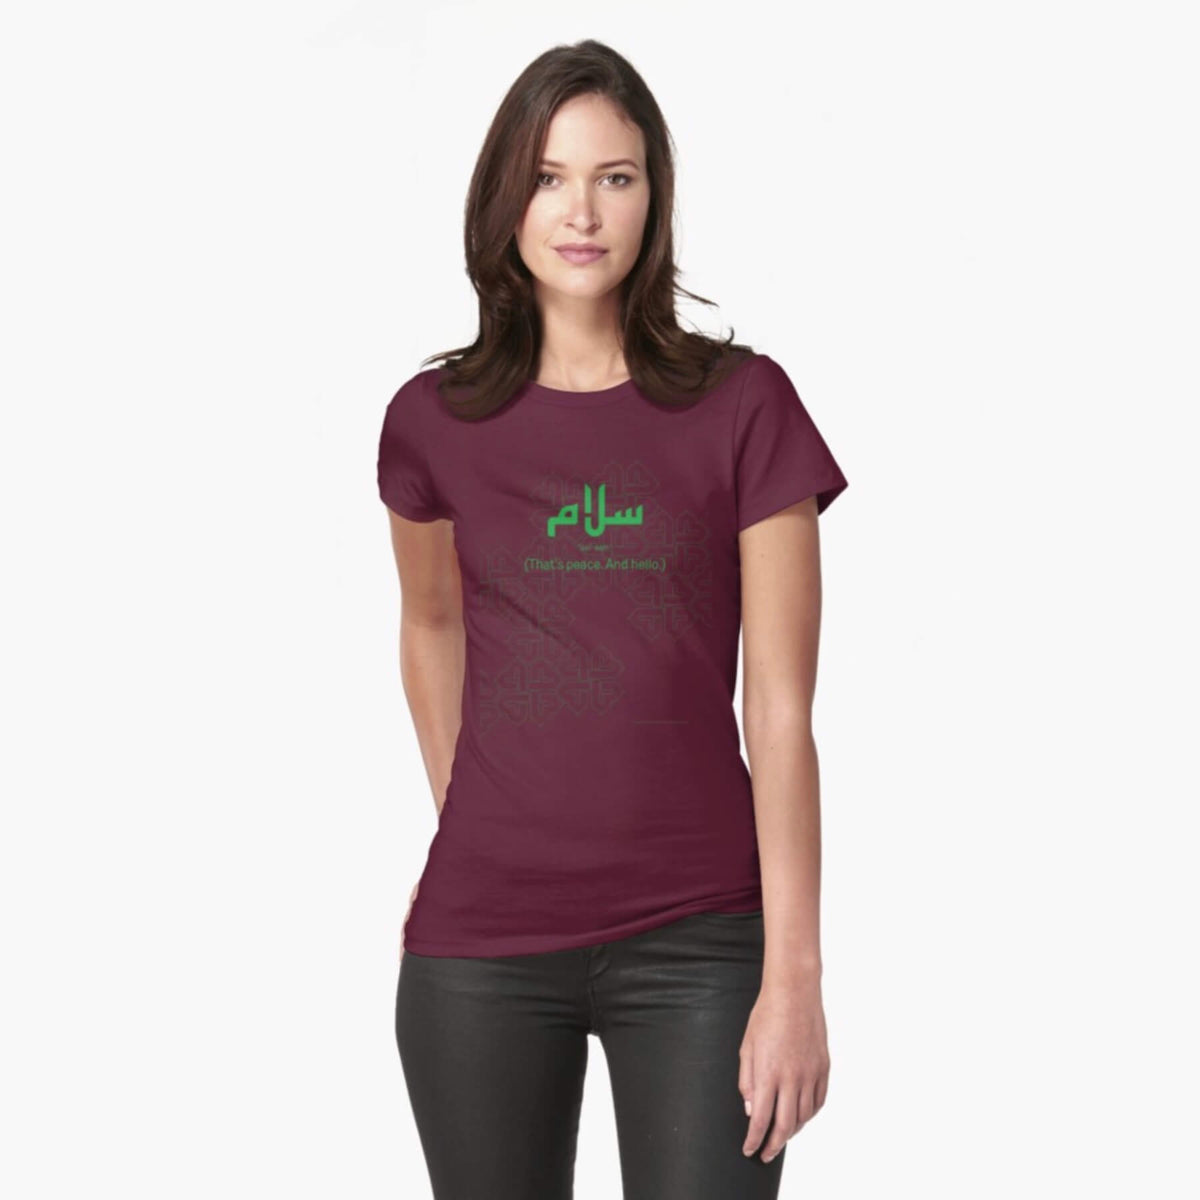 A white female model with hazel eyes and brown shoulder-length hair wears the Haluna Happy Names exclusive &#39;Salaam—Arabic Key Words&#39; design burgundy fitted t-shirt and a pair of tight black jeans. The word &#39;salaam&#39; is written in green in Arabic with a kufic-style font, and beneath it in English the words &quot;Sal-aam&quot; and beneath that the words &#39;(That means peace. And hello)&#39;. The text is positioned on the tshirt so it falls across the chest of the model against a complementary green patterned background print.